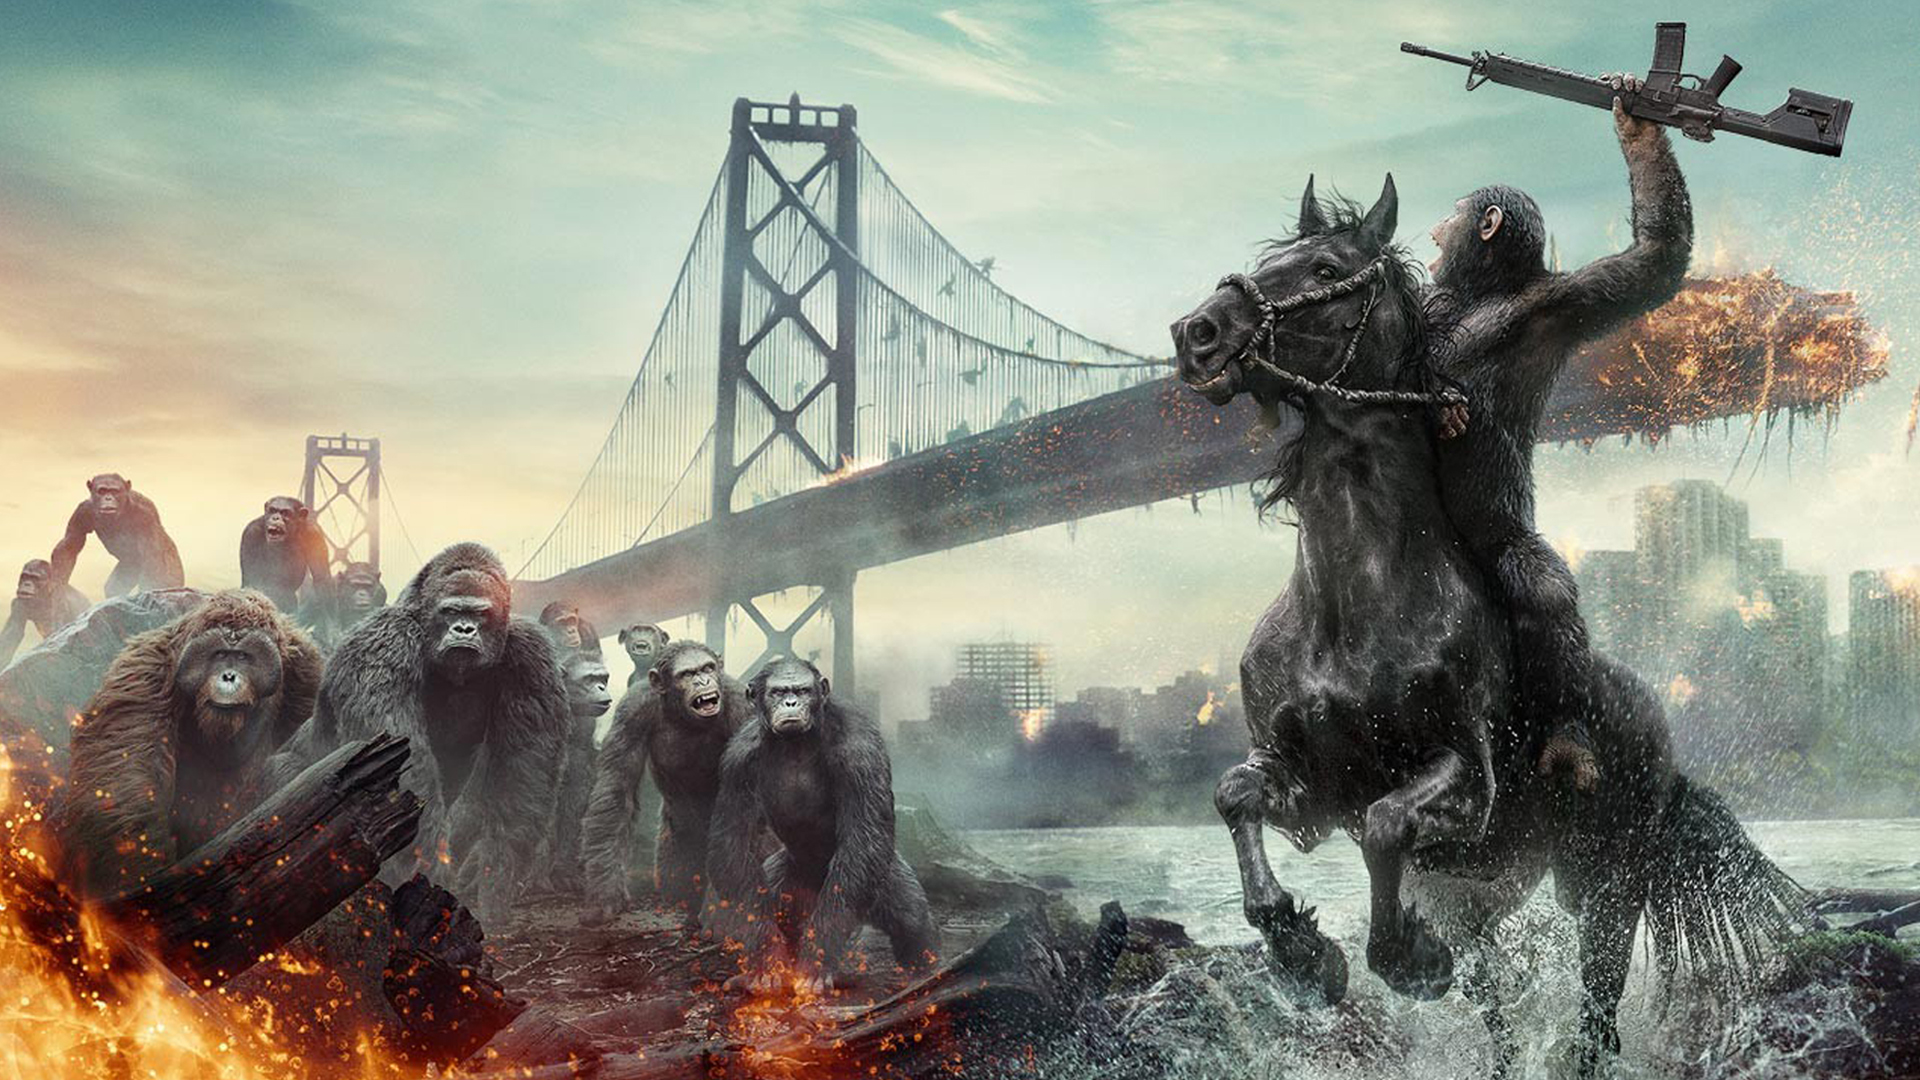 Download War For The Planet Of The Apes wallpapers for mobile phone free  War For The Planet Of The Apes HD pictures